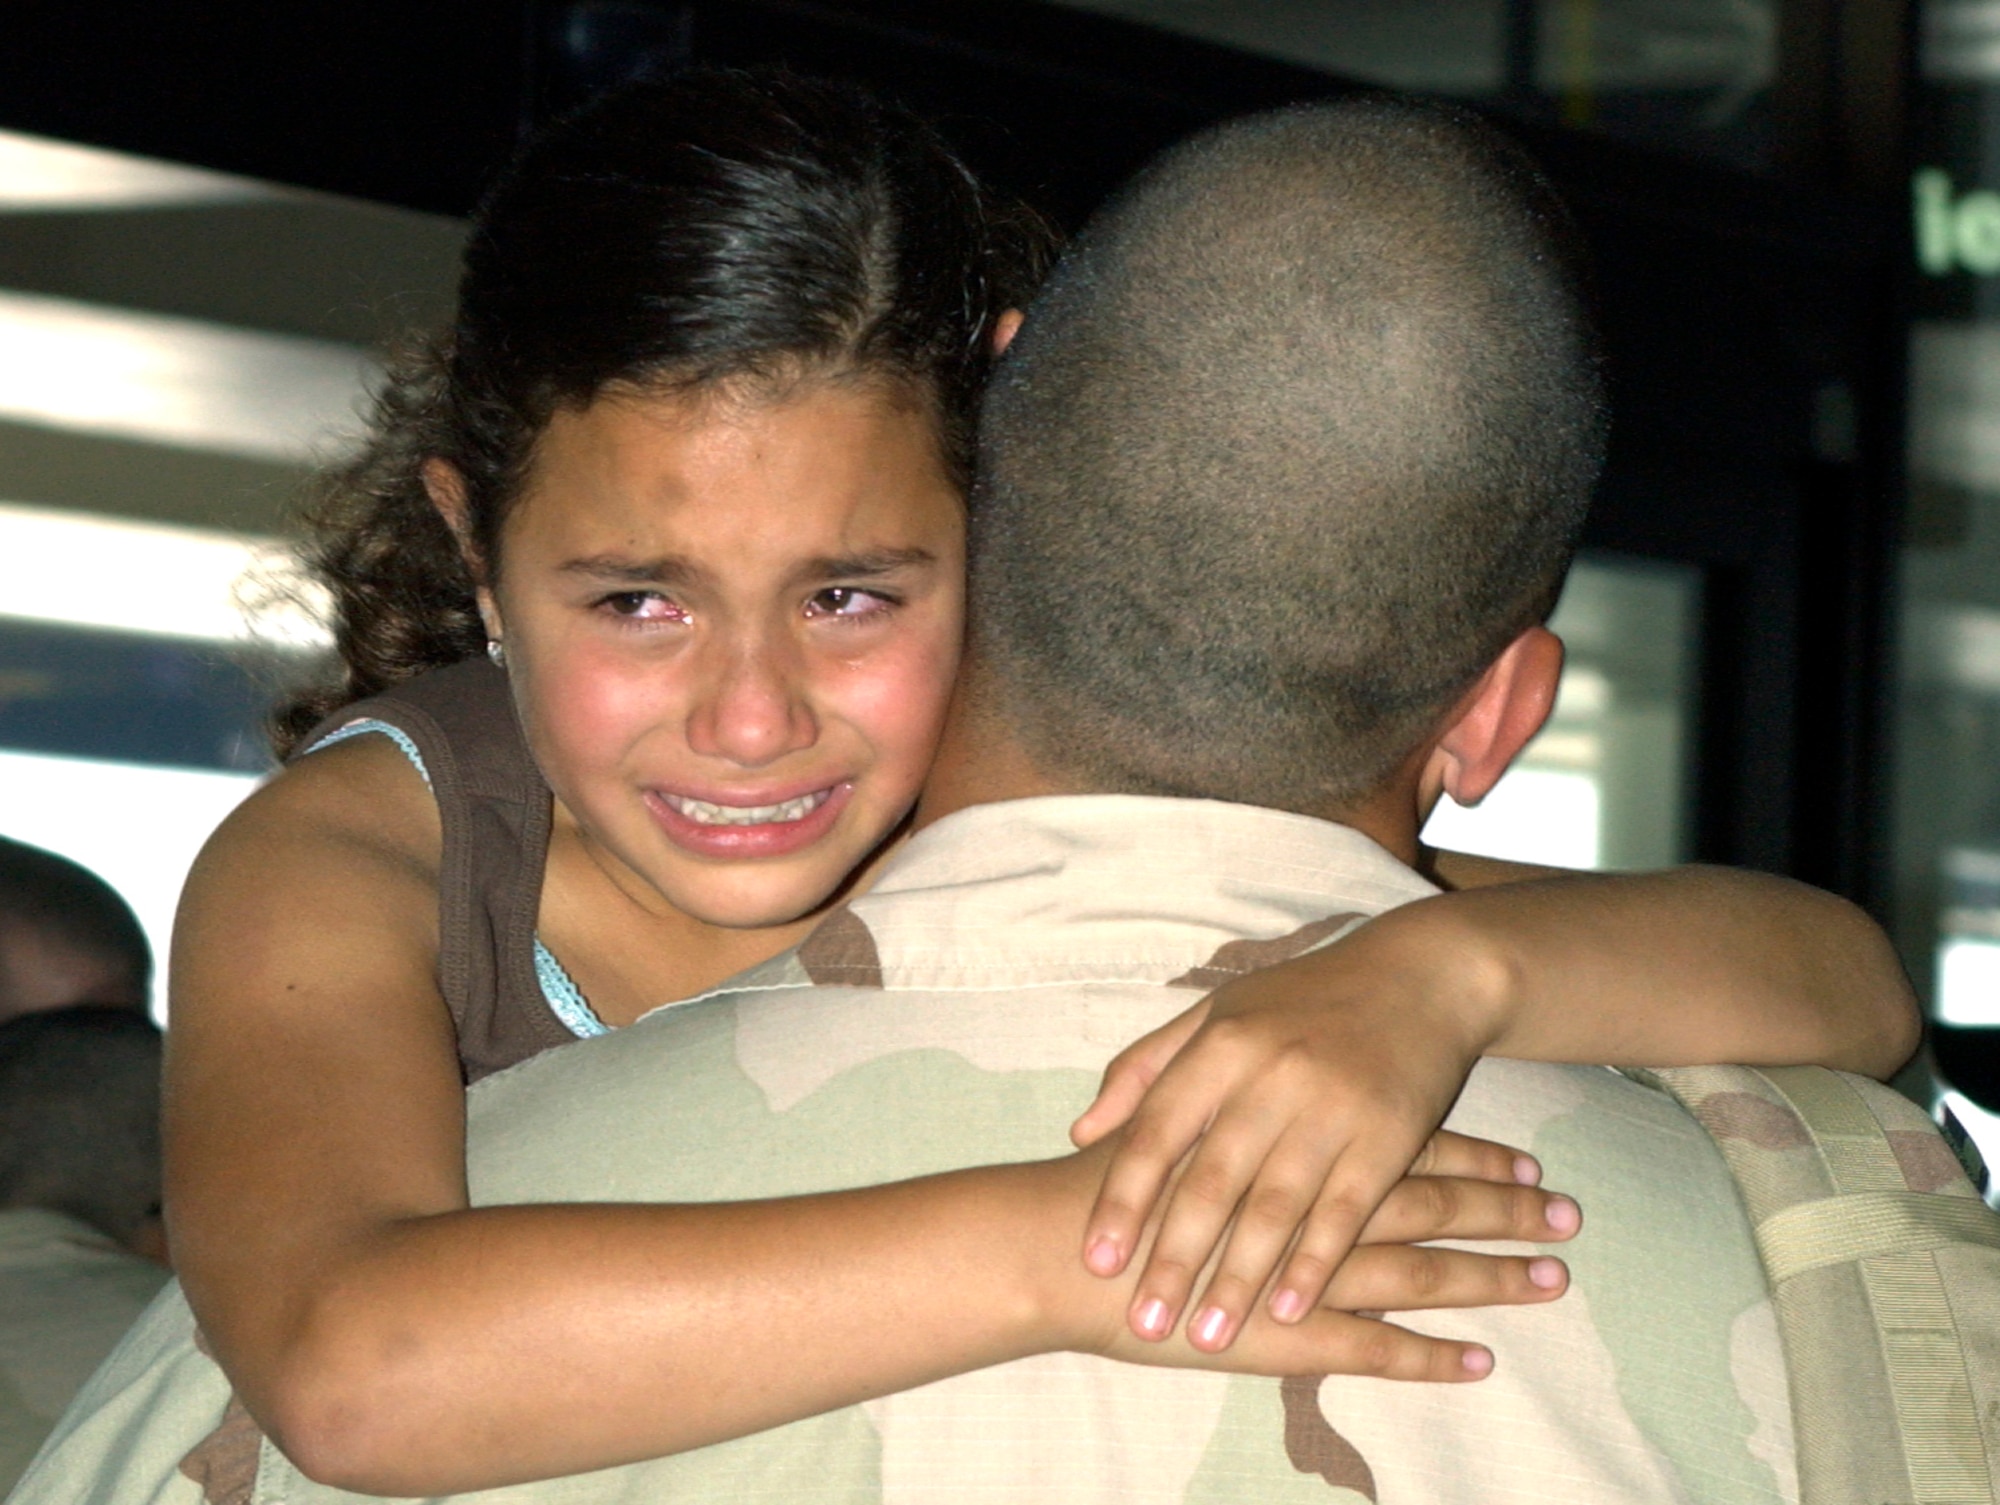 Senior Airmen Raul Quinonez is greeted by his 10-year-old goddaughter Berenice Mejia at the Los Angeles Airport Sat., August 11. Airmen Quinonez was on of six team members from the 452nd Security Forces Squadron at March Air Reserve Base to return from a six month deployment to Kirkuk, Iraq.                               